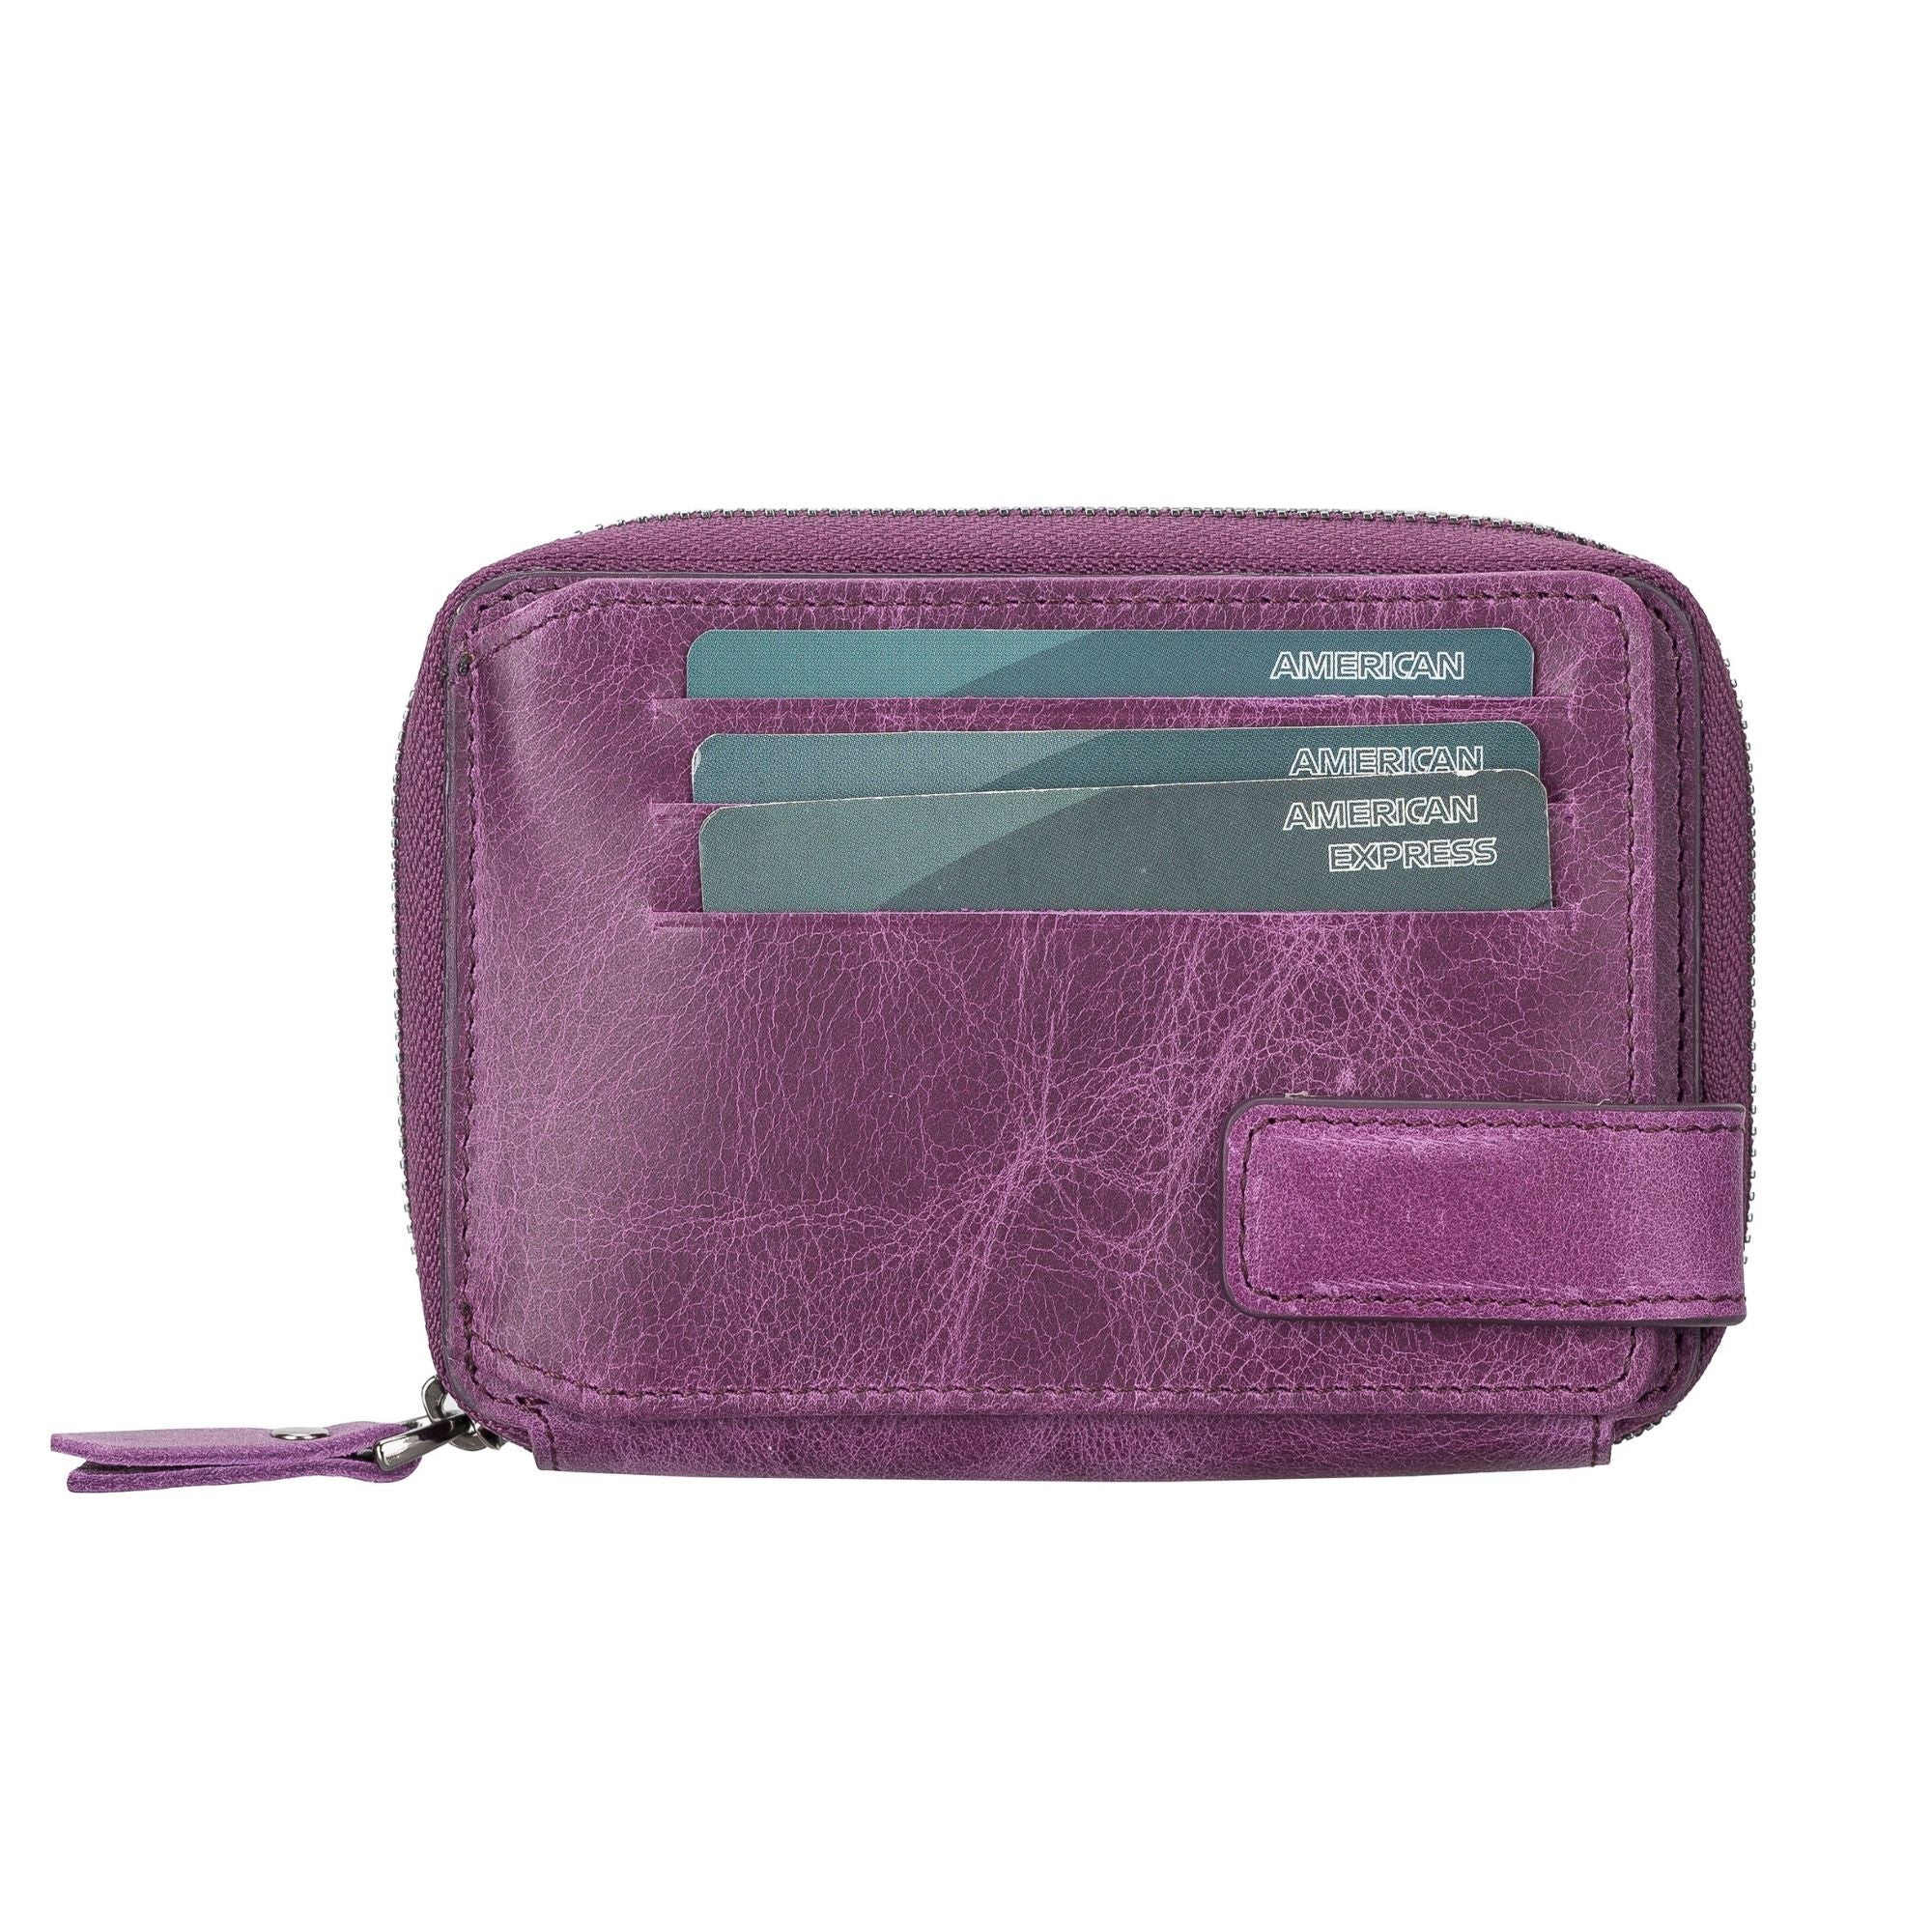 Powell Handmade Unisex Leather Wallet with Zippered Compartment - Purple - TORONATA